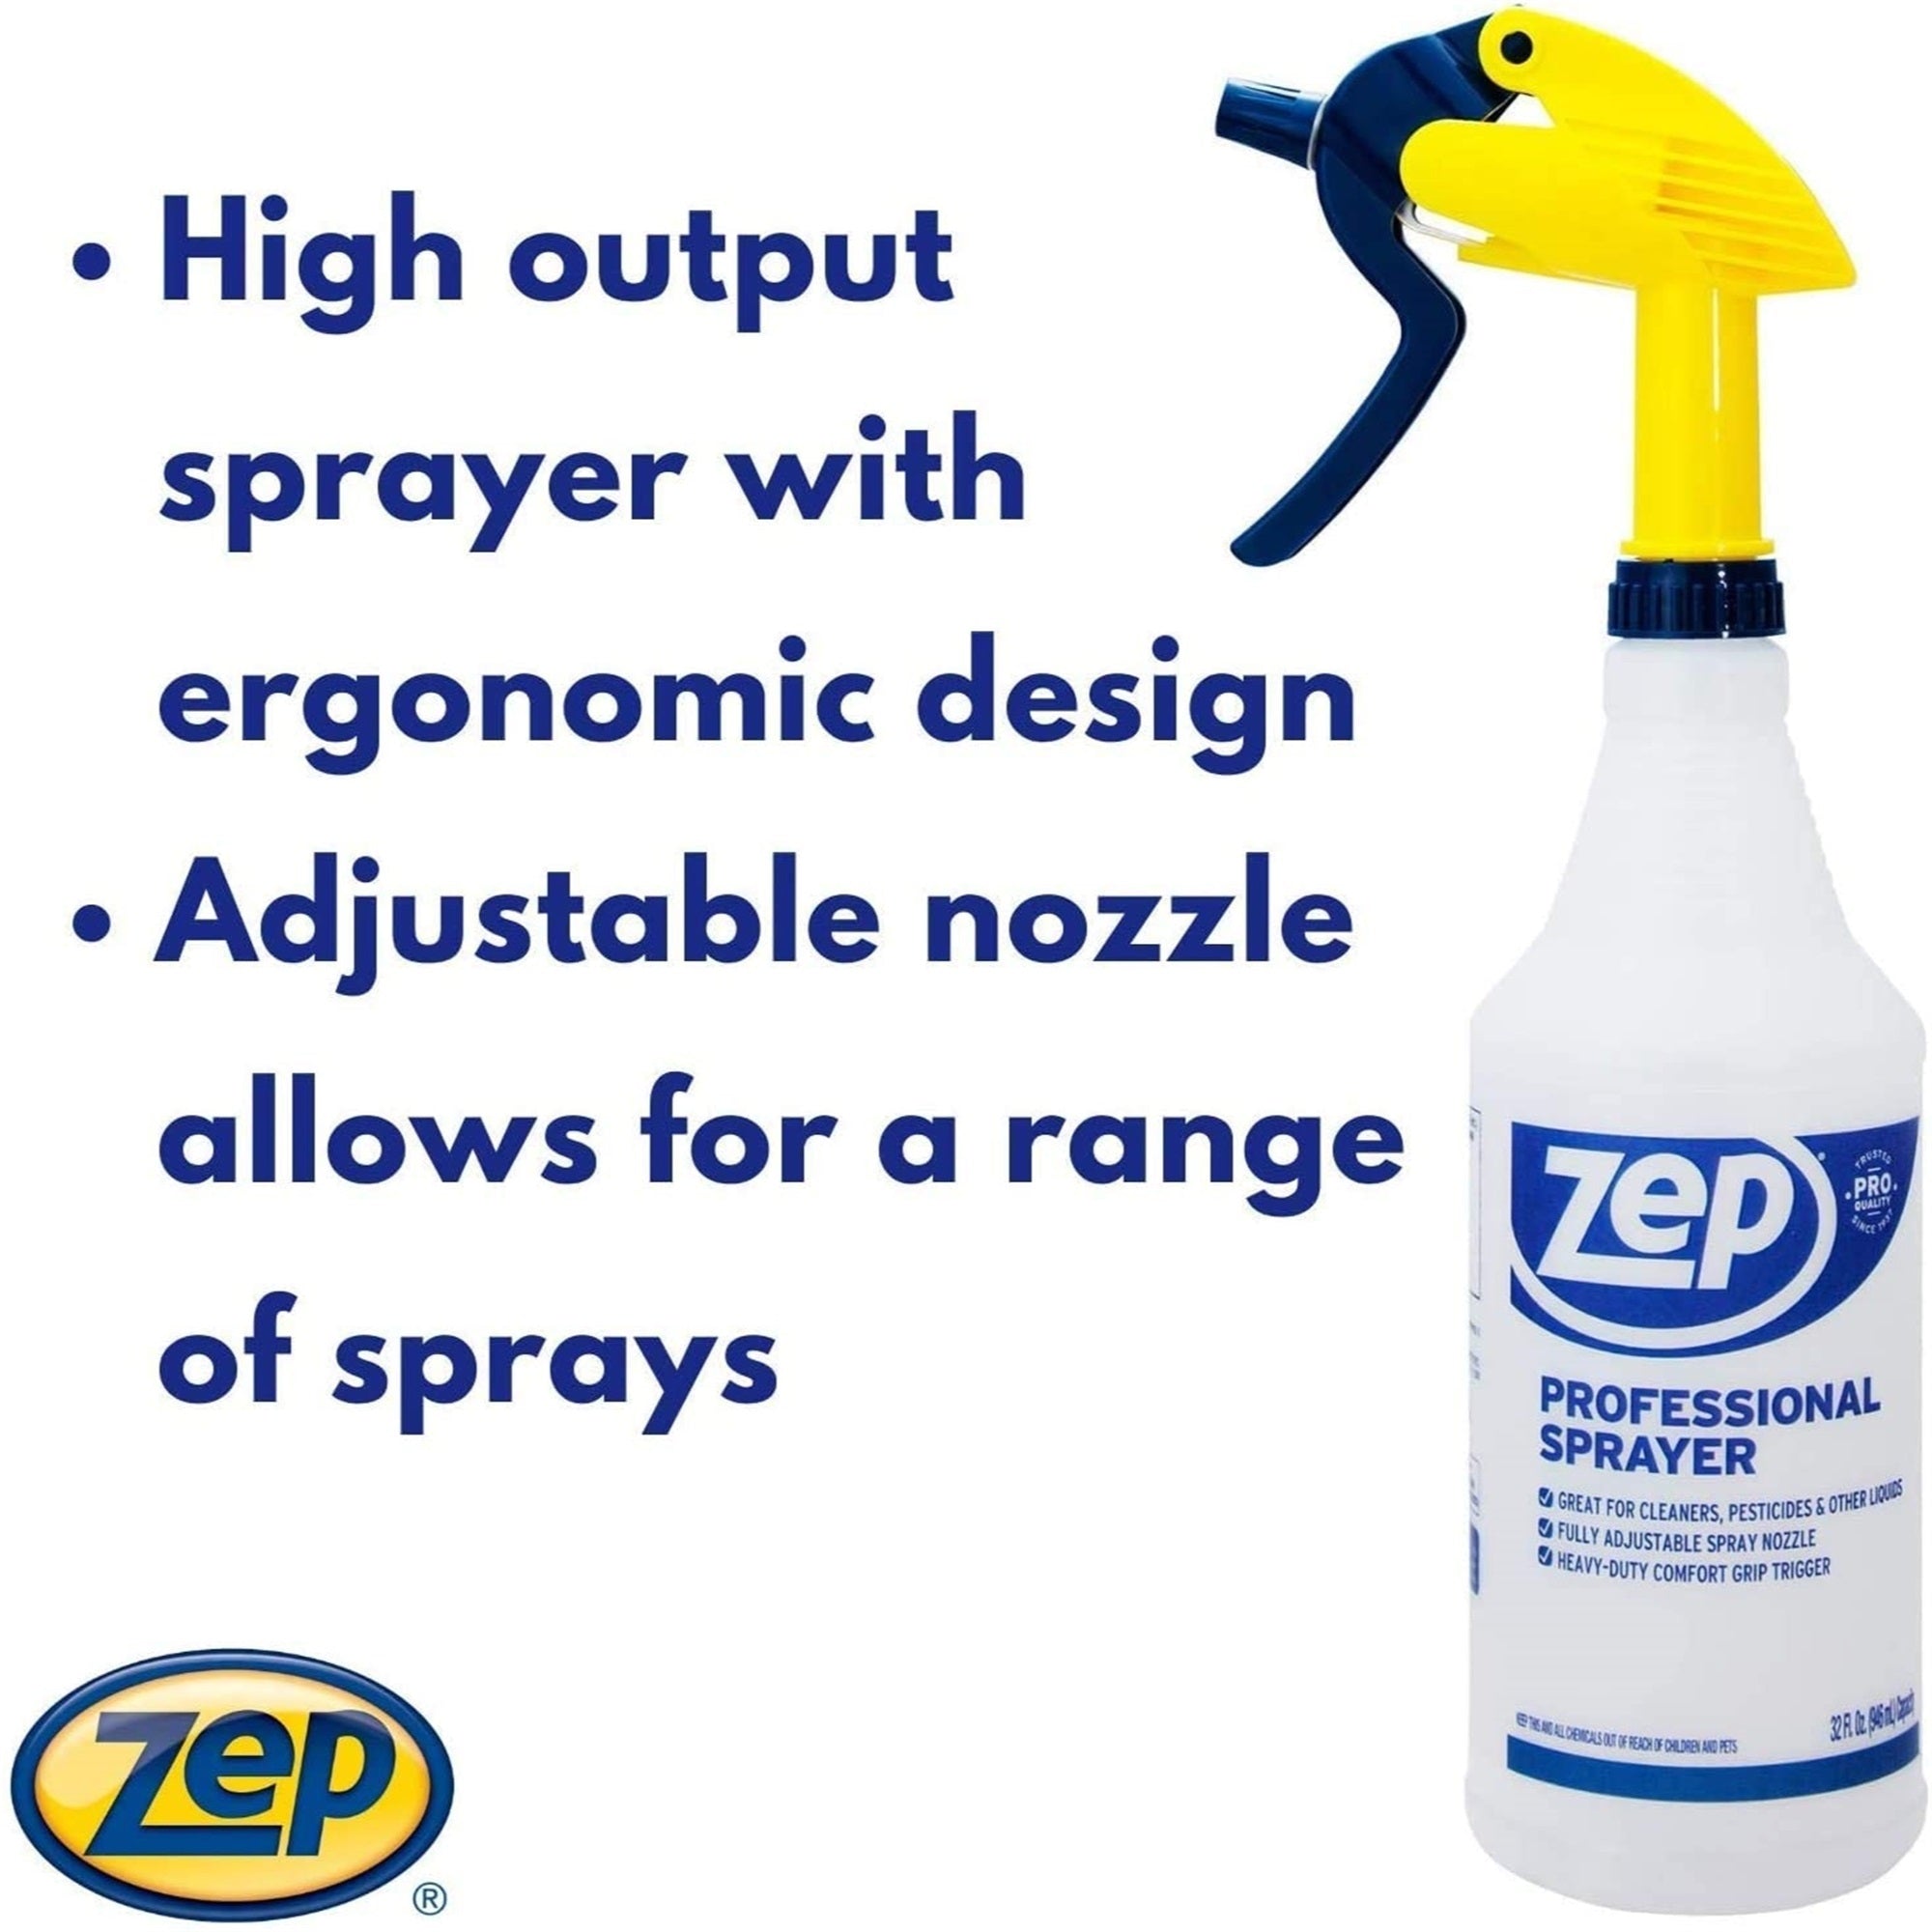 Zep (#HDPRO36) Commercial Professional Spray Bottle, 32 oz